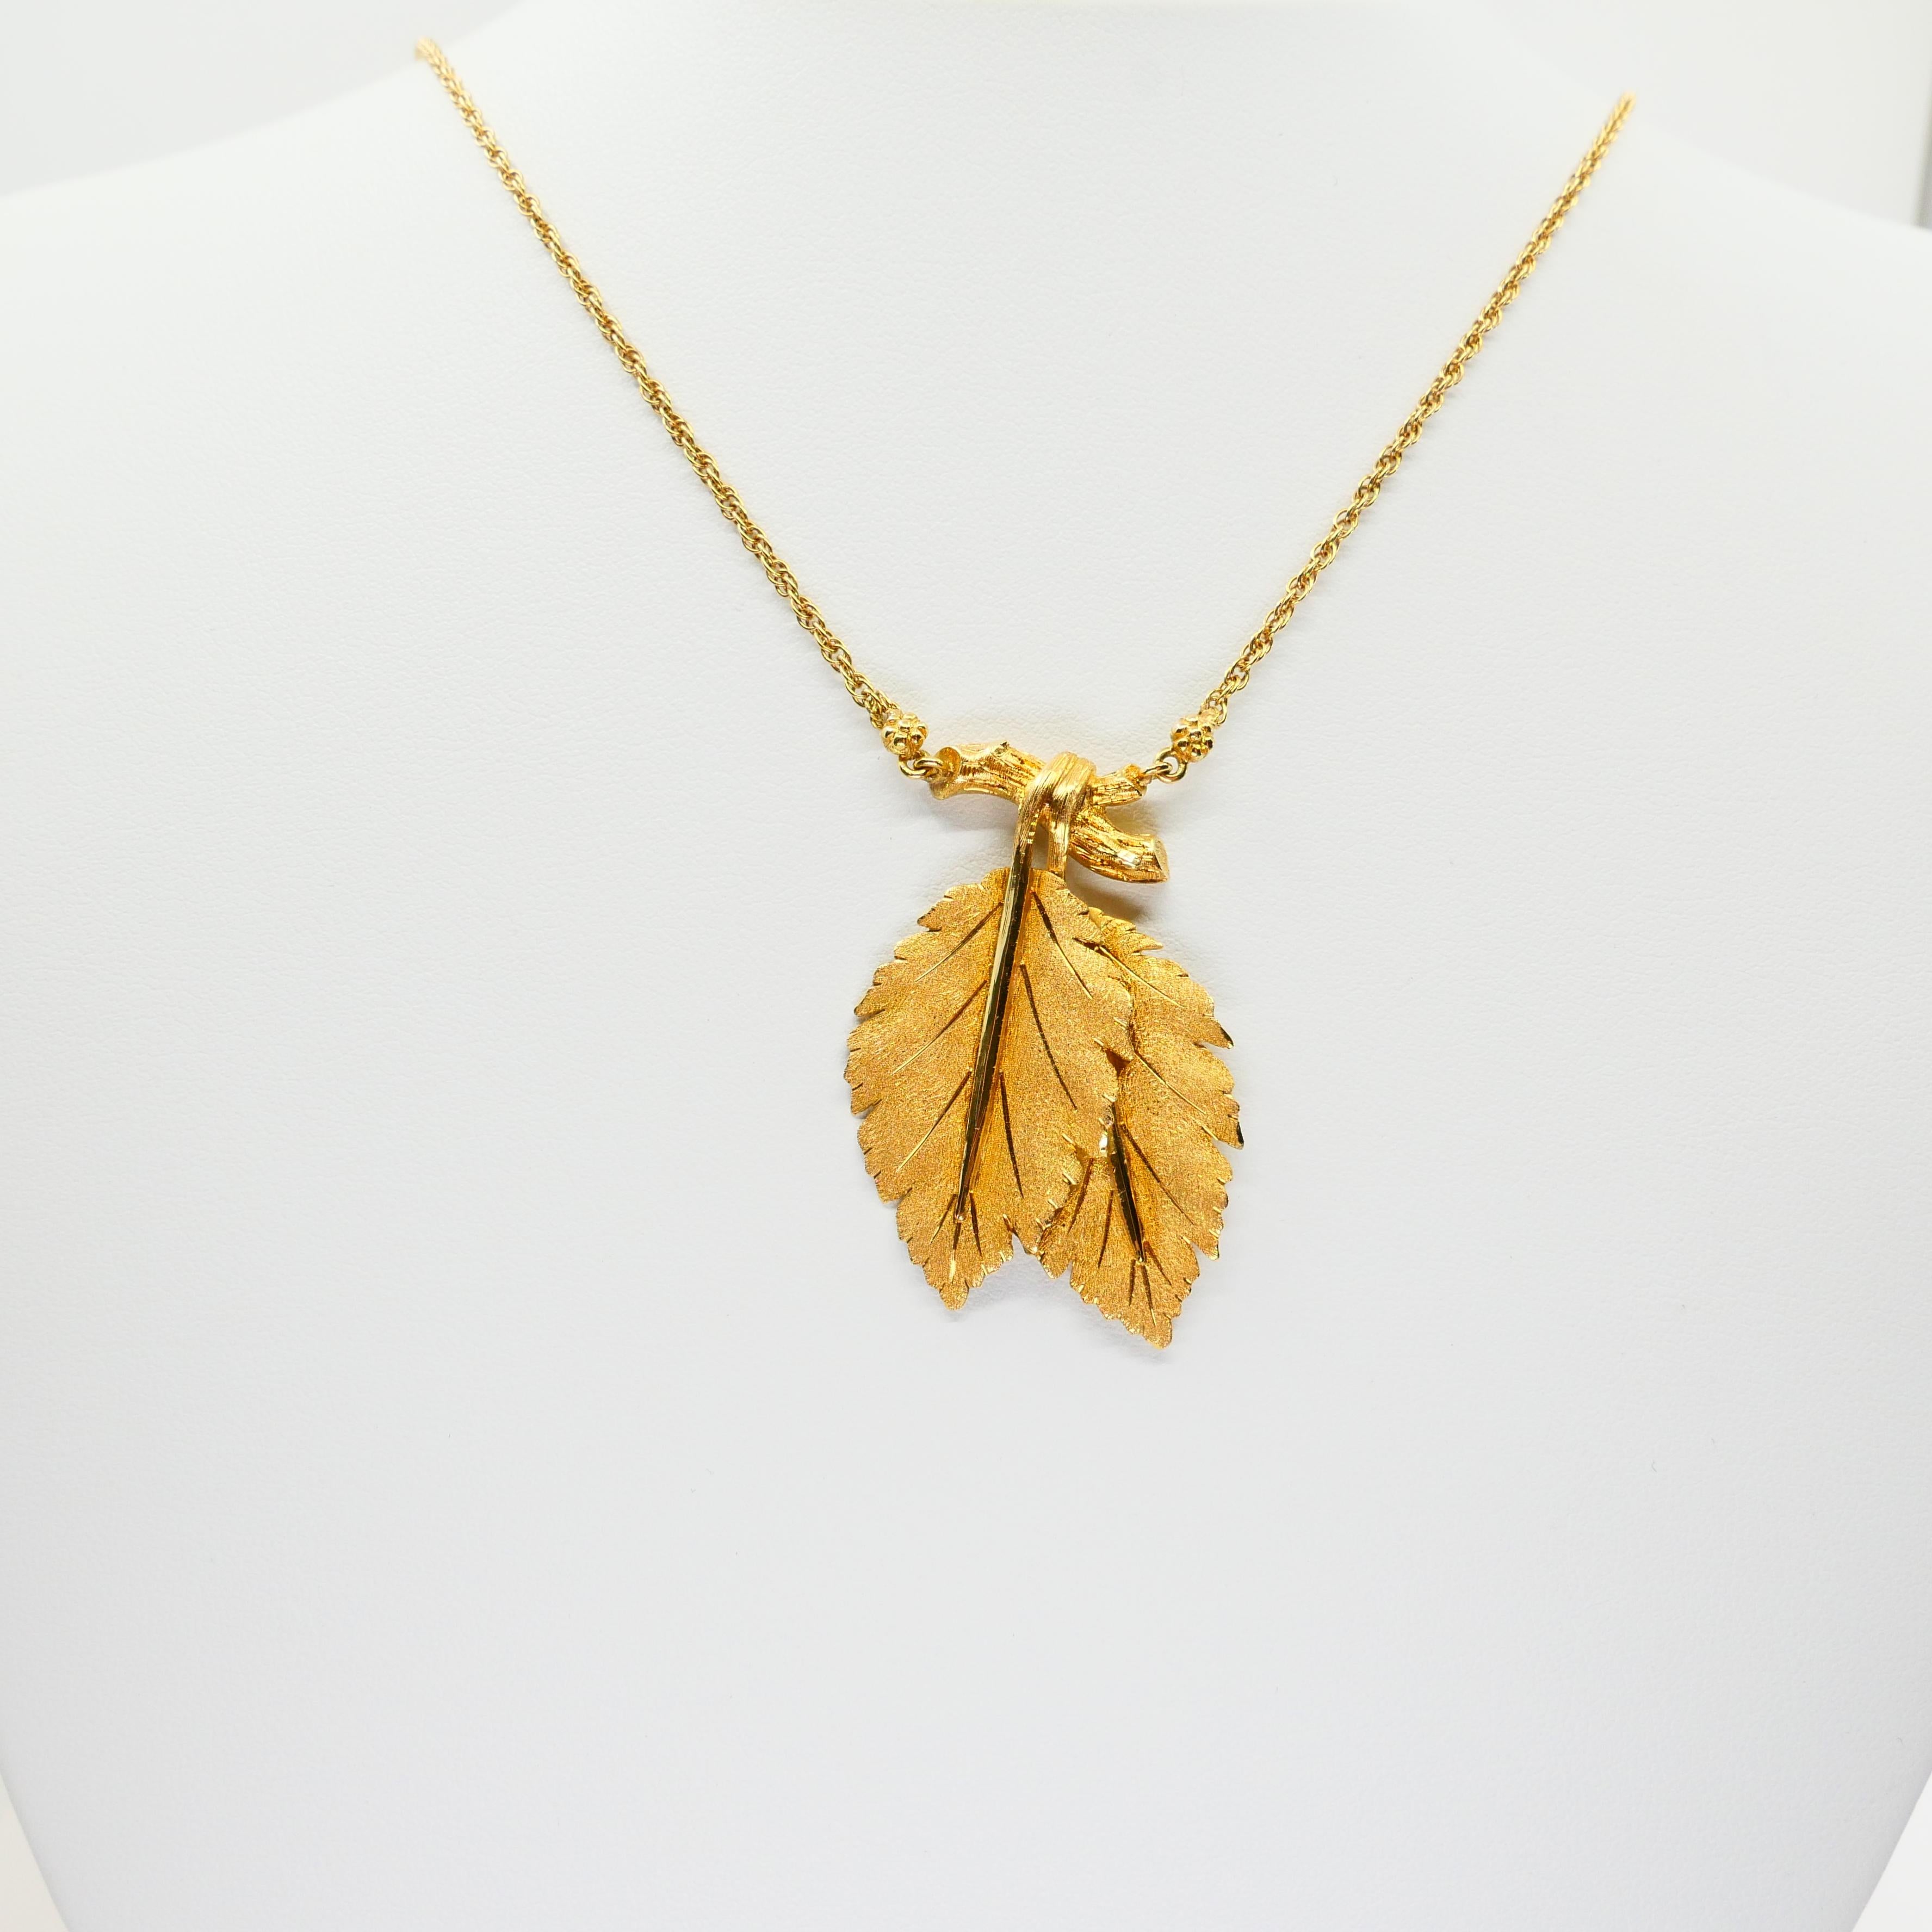 Buccellati, Federico 18K Yellow Gold Leaves and Twigs Pendant Drop Necklace  10